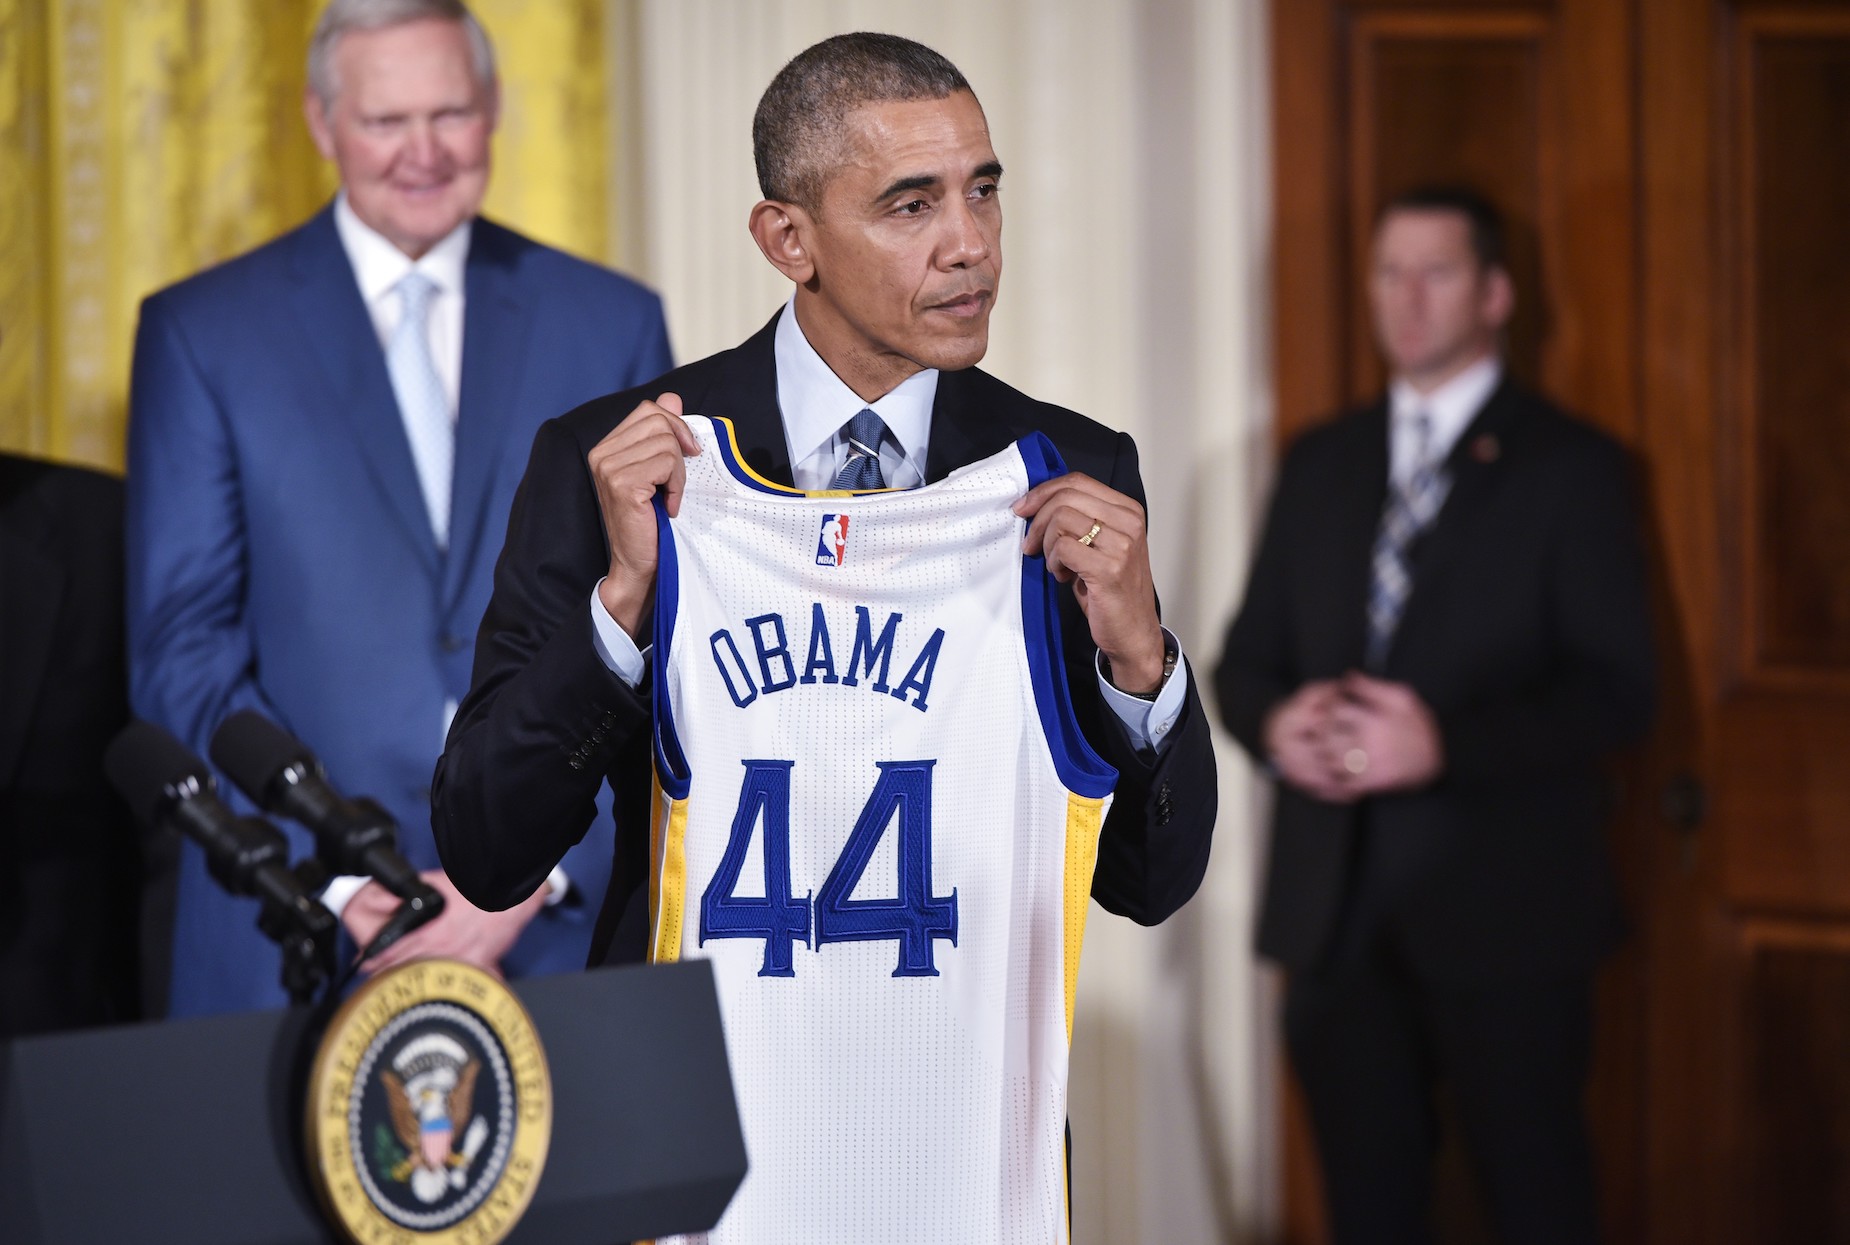 The Golden State Warriors are following Barack Obama's advice ahead of the 2020 NBA draft.